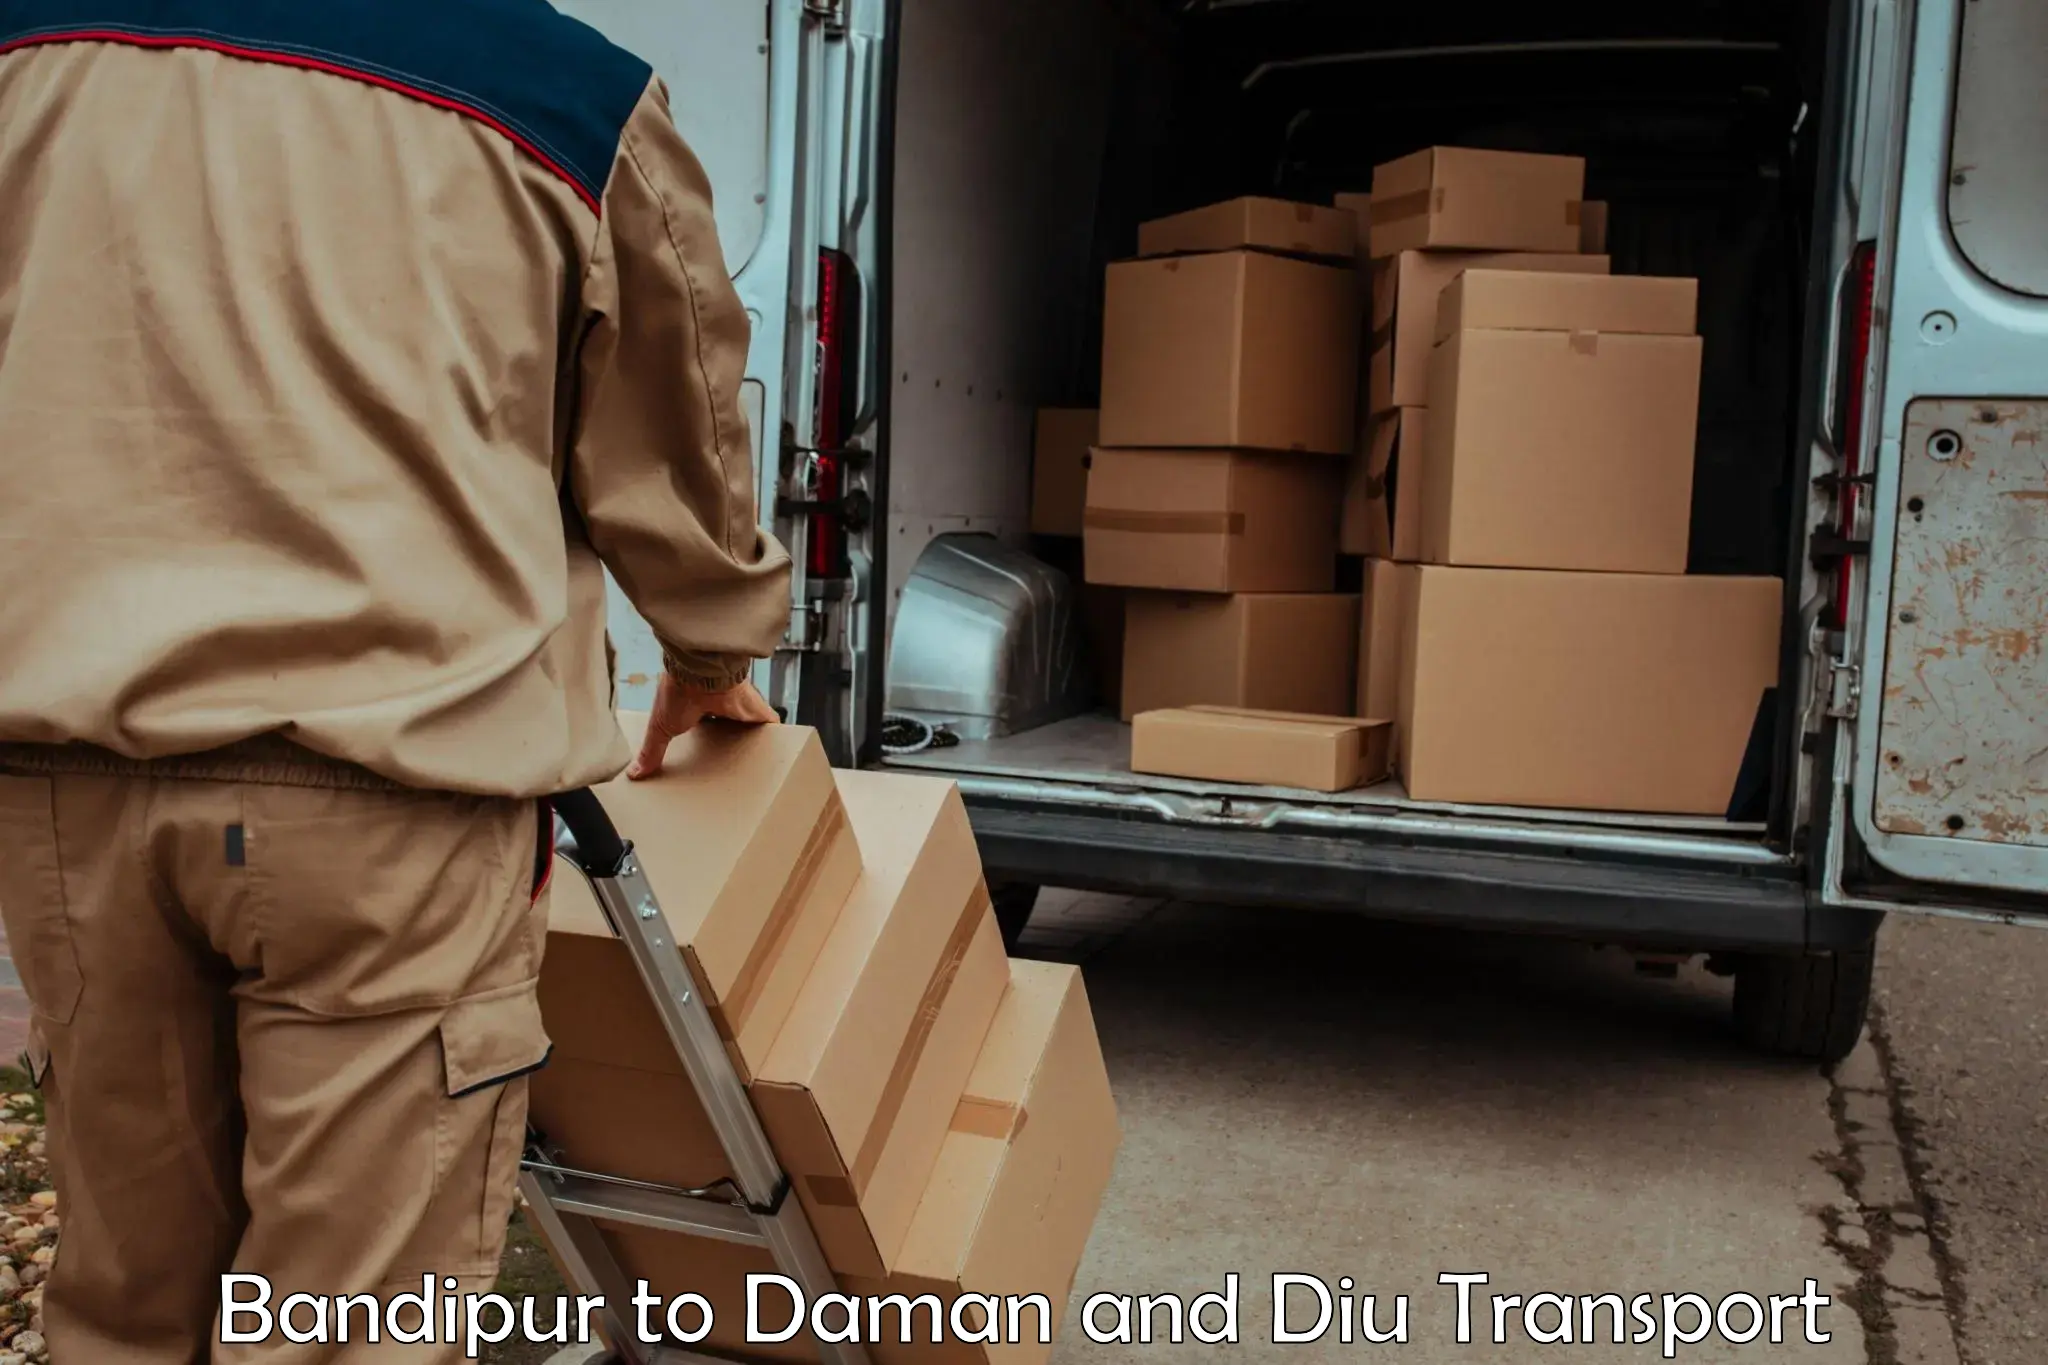 Truck transport companies in India Bandipur to Daman and Diu